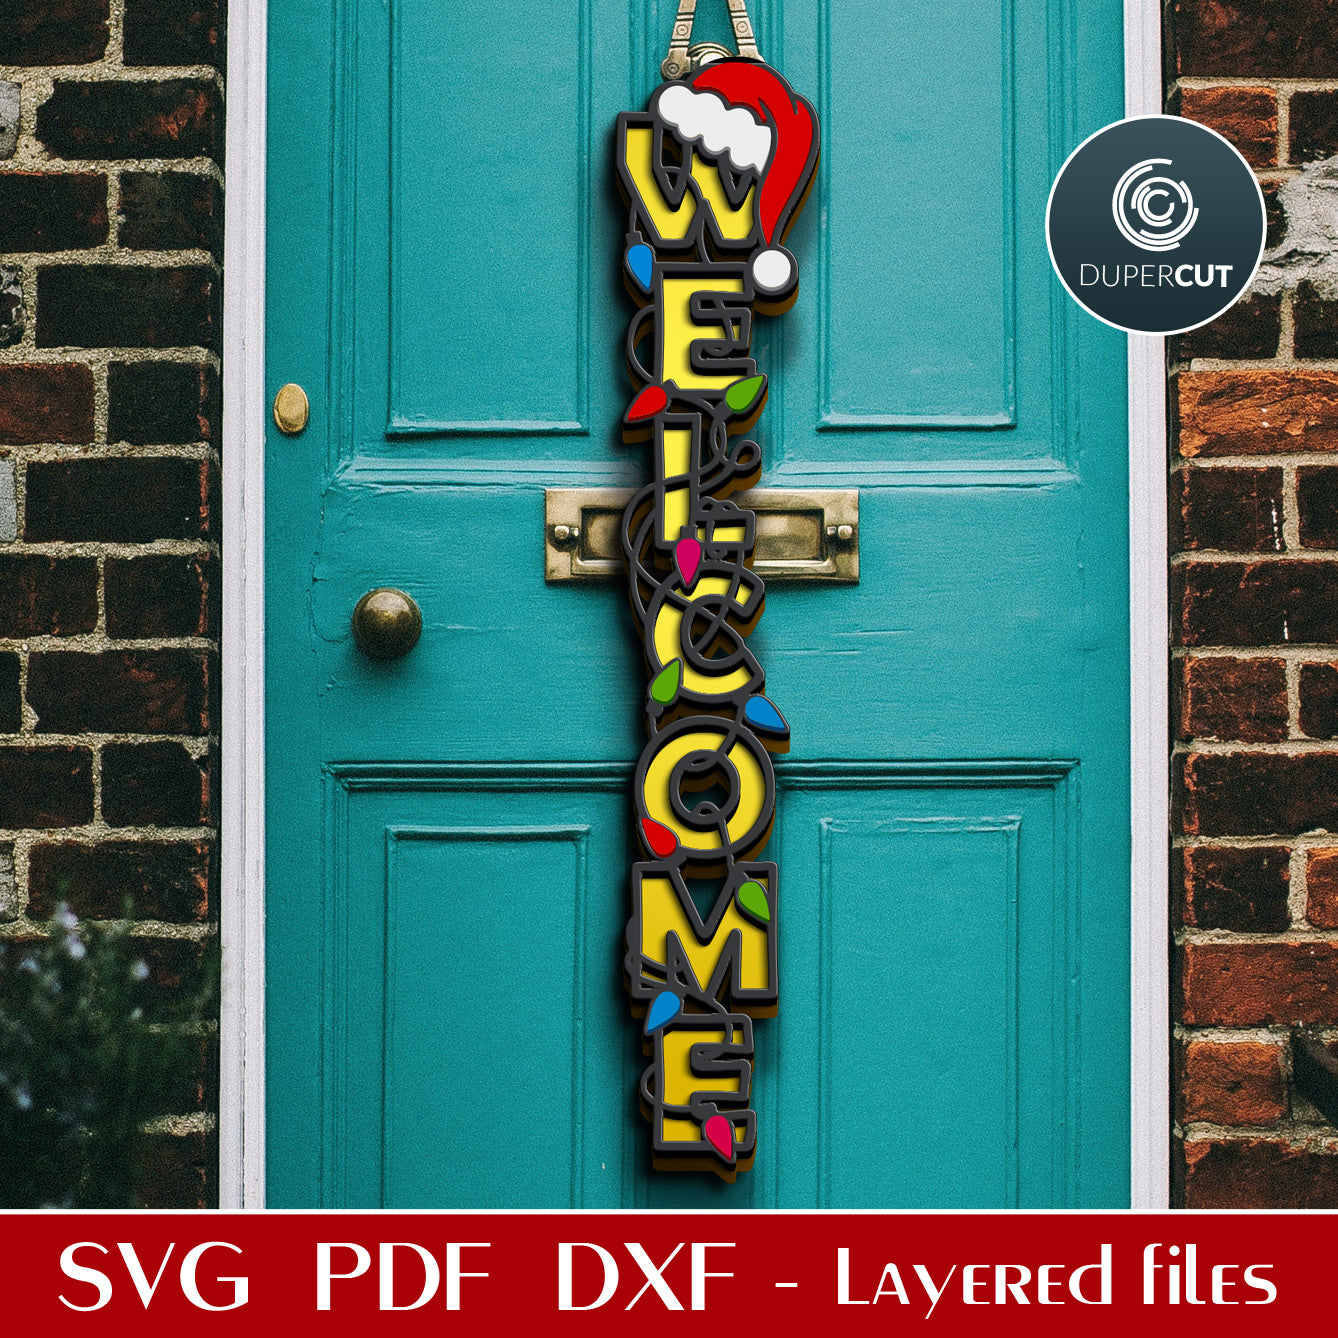 Welcome door hanger with holiday lights Christmas decoration - SVG DXF laser cutting files for Glowforge, Cricut, CNC plasma machines by www.DuperCut.com